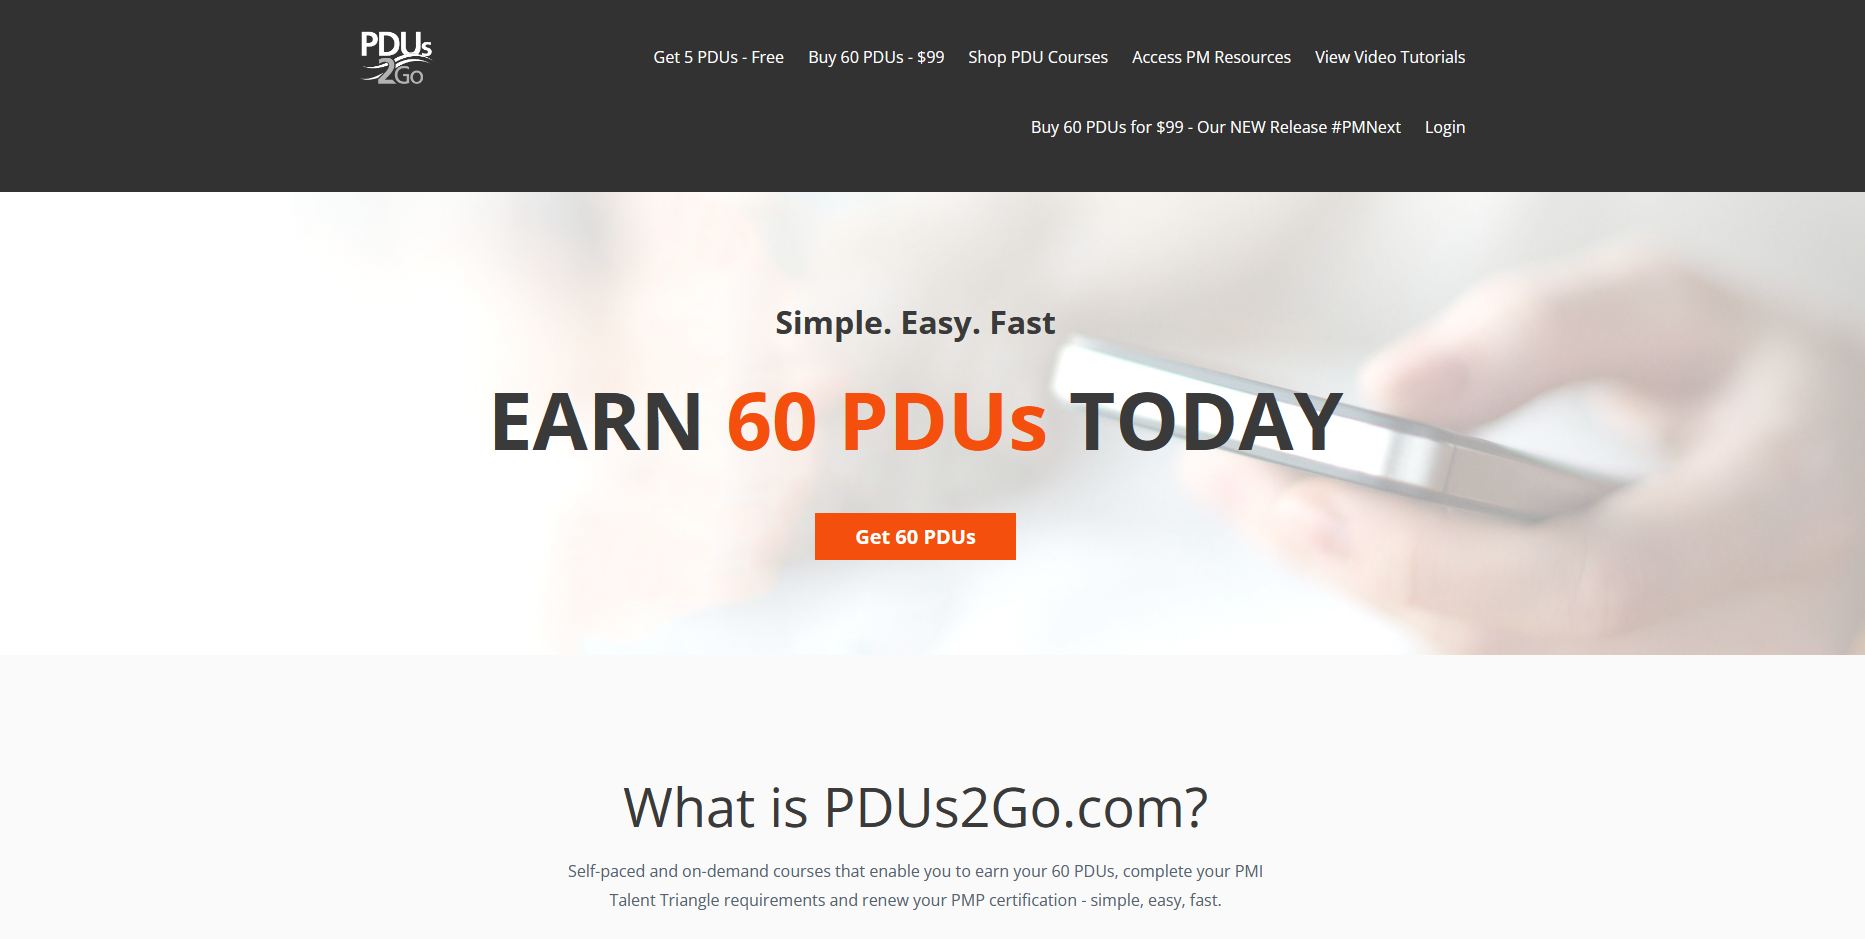 pdus2Go homepage booth 1